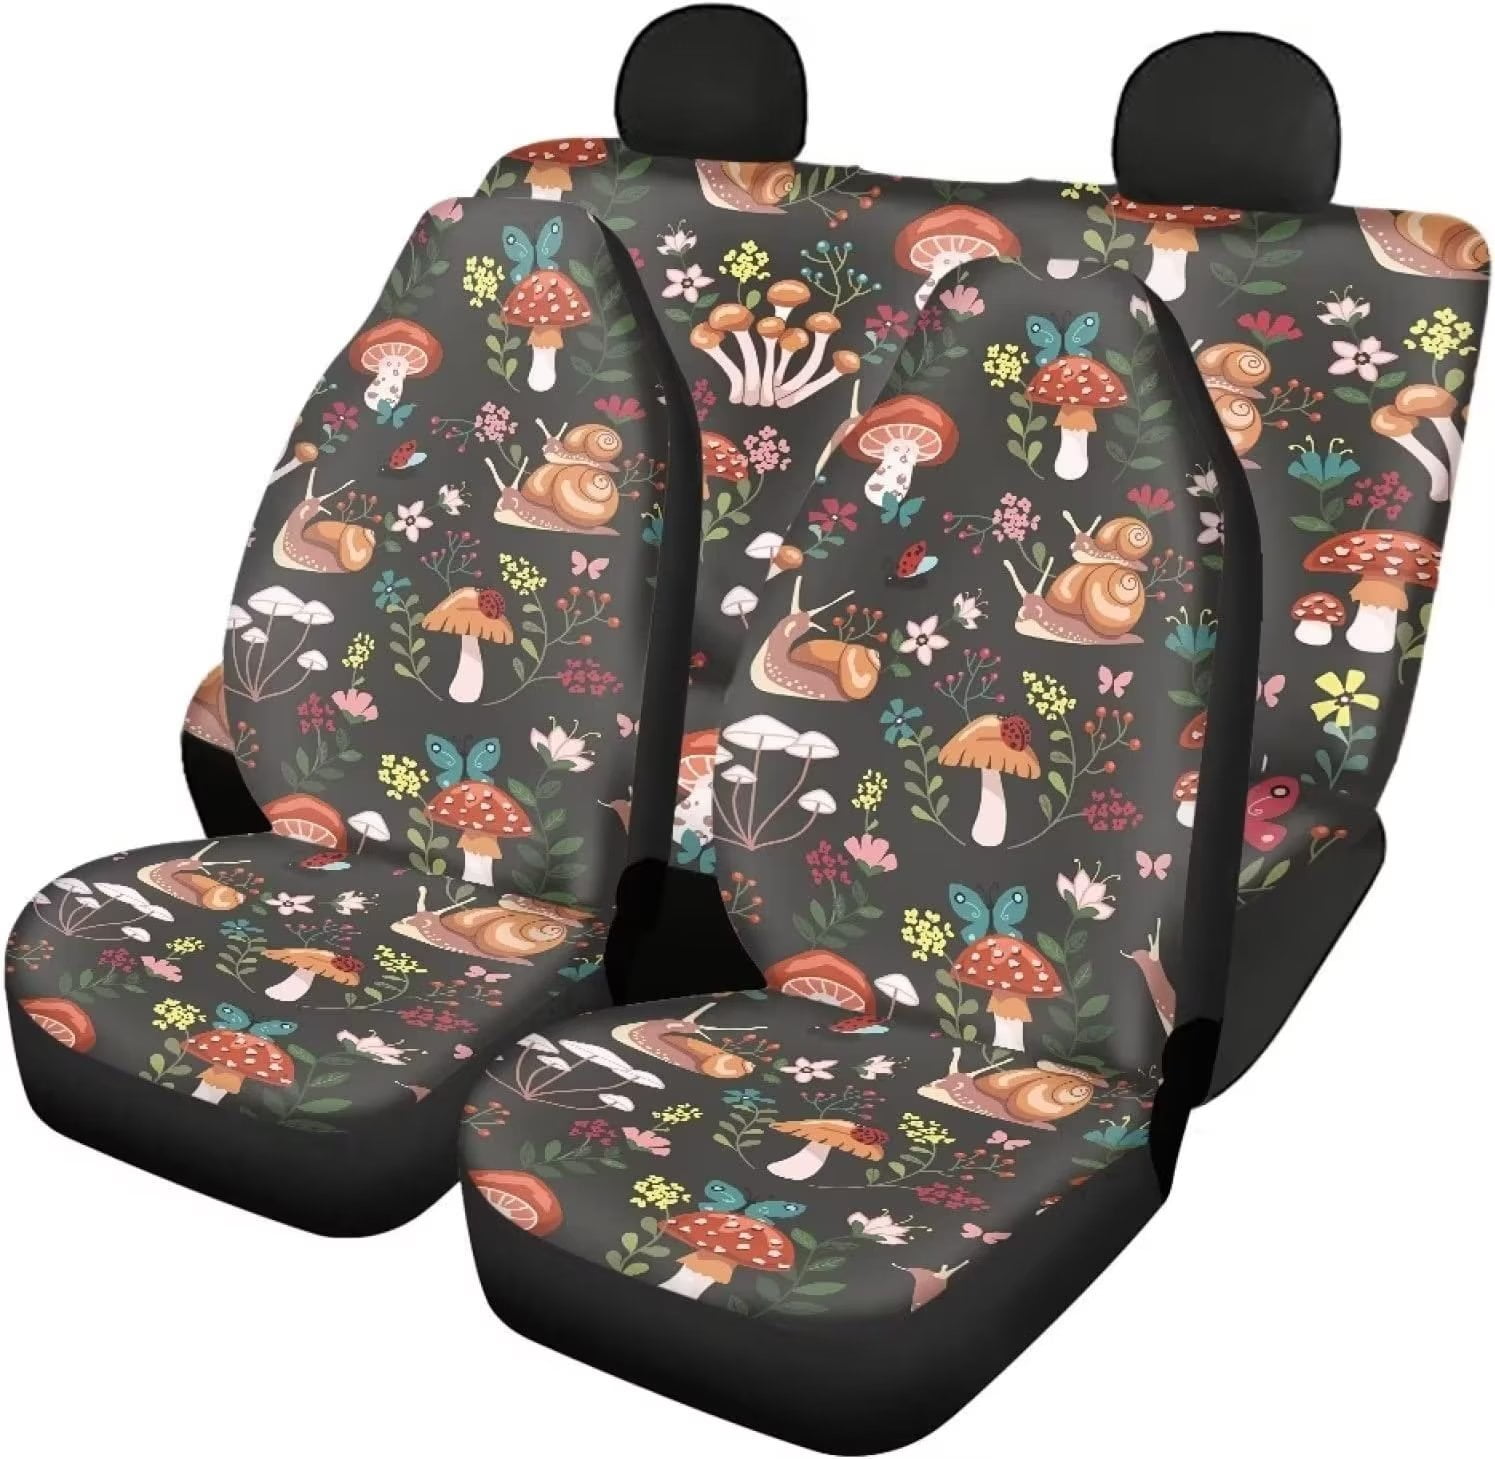 Pzuqiu Mushroom Snail Automotive Seat Covers Full Set Front and Rear 4Pcs Car  Seat Cover for Women Universal Fit for SUV Sedan Van Truck Car Fabric Seat  Protector